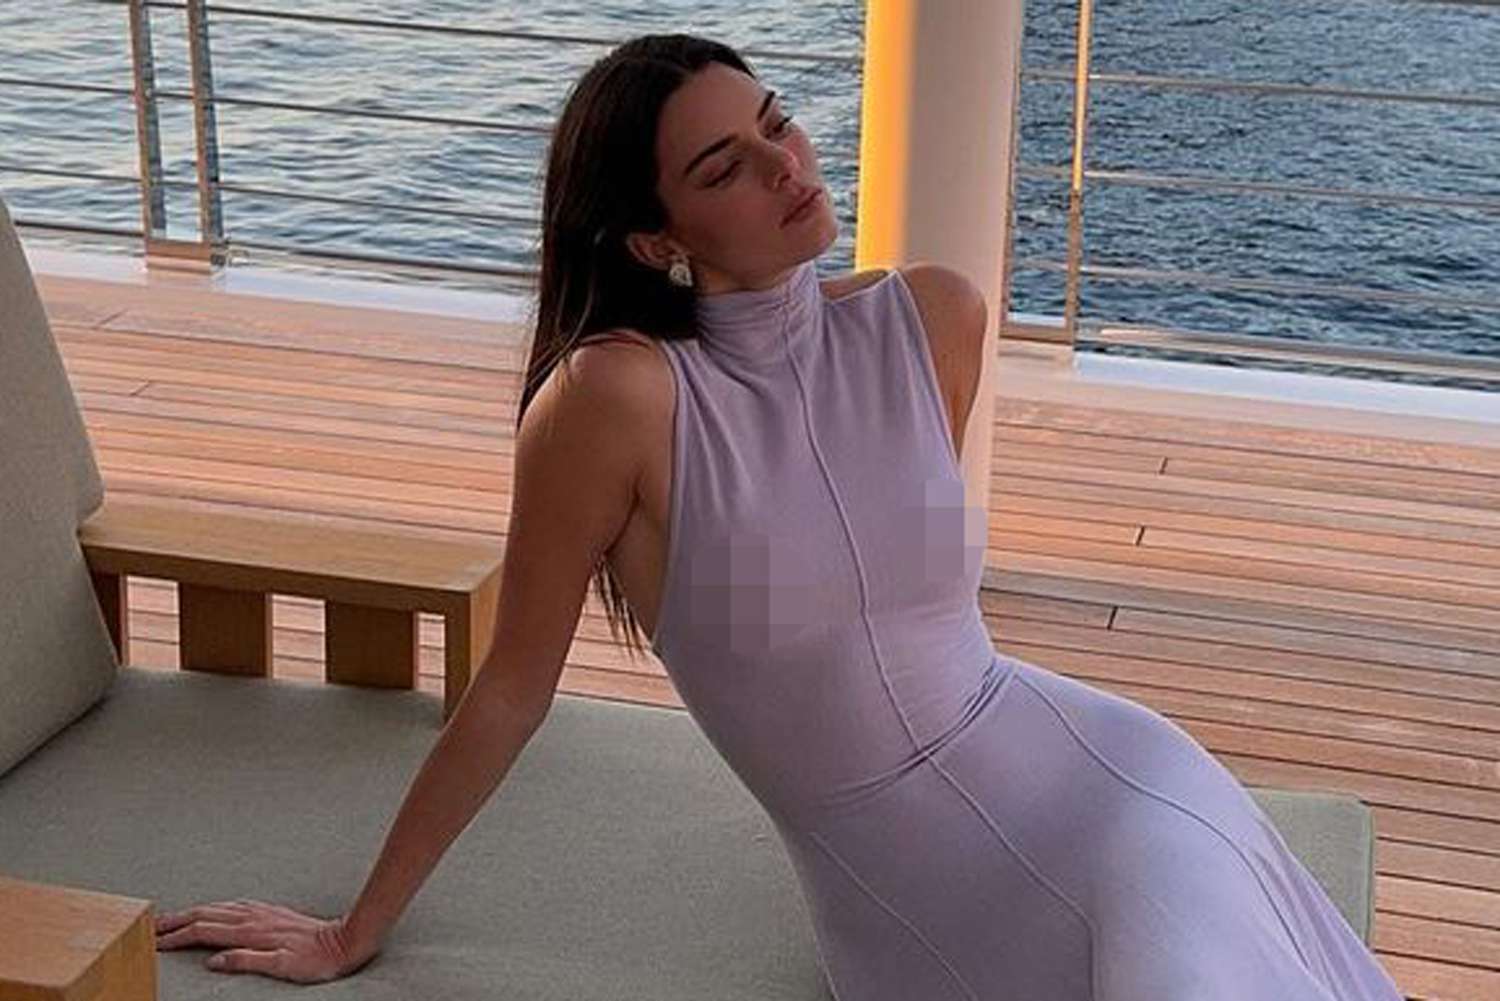 Khloé Kardashian Reacts to Kendall Jenner Posing in a Nipple-Baring Dress on a Yacht: ‘Best Nips in Town’